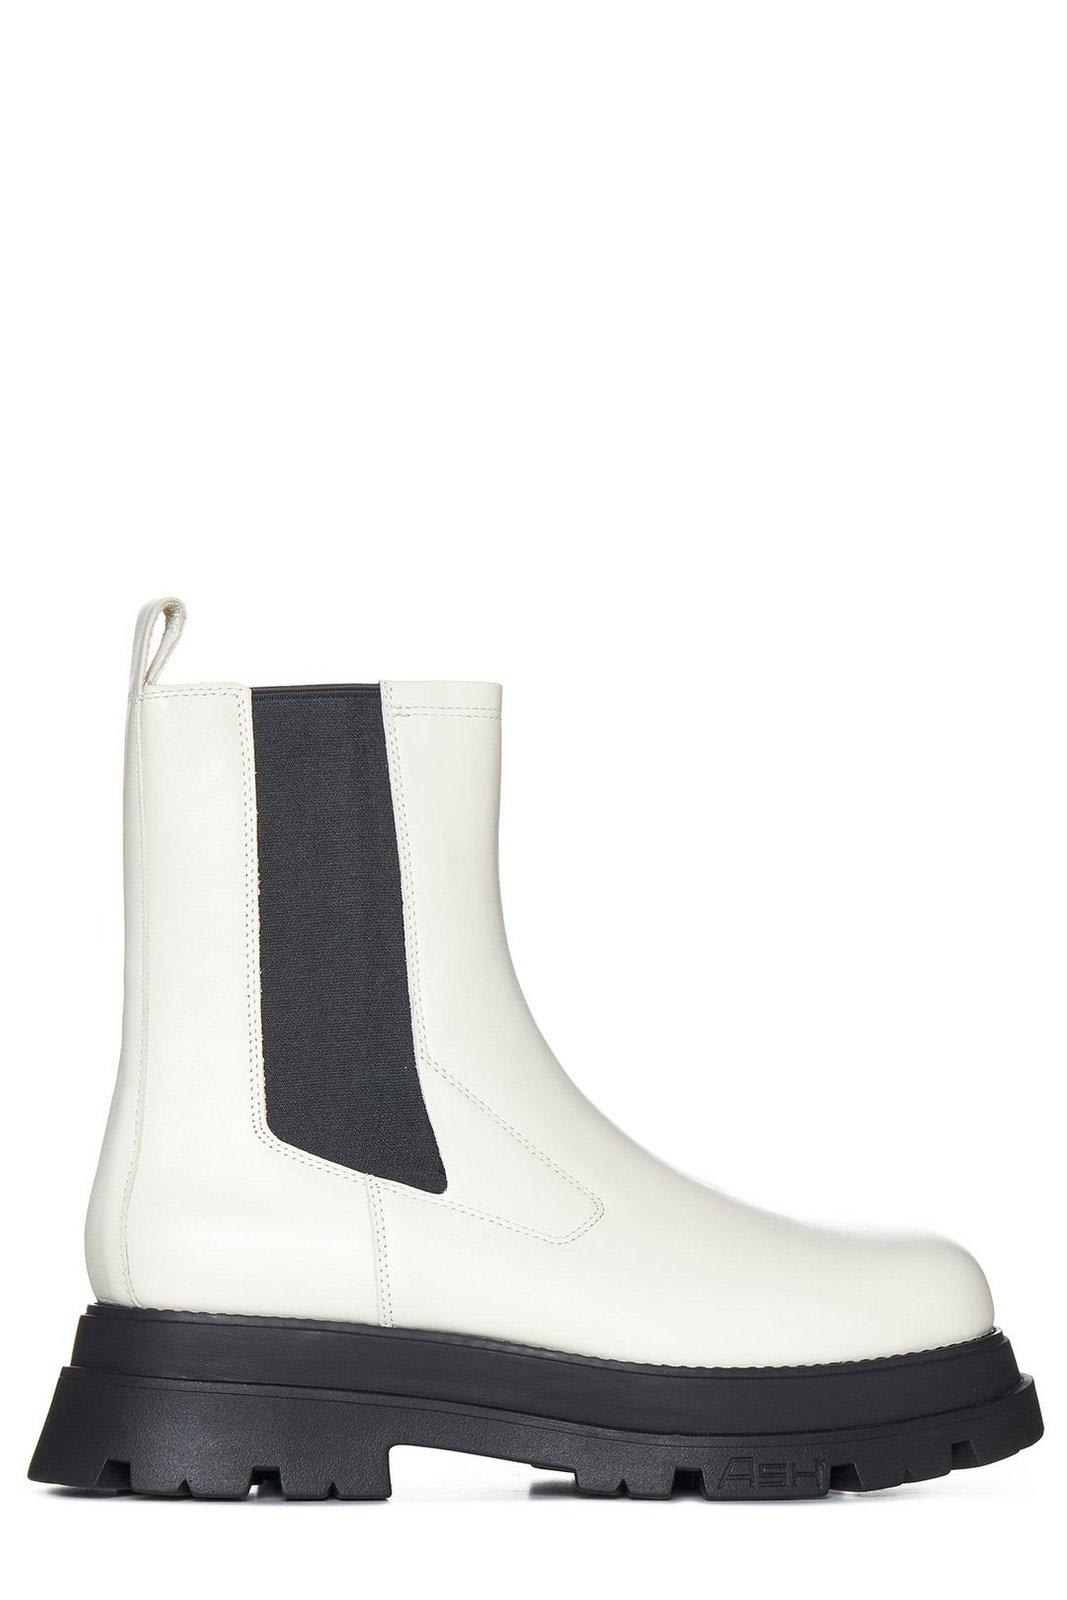 Ash Panelled Round Toe Boots